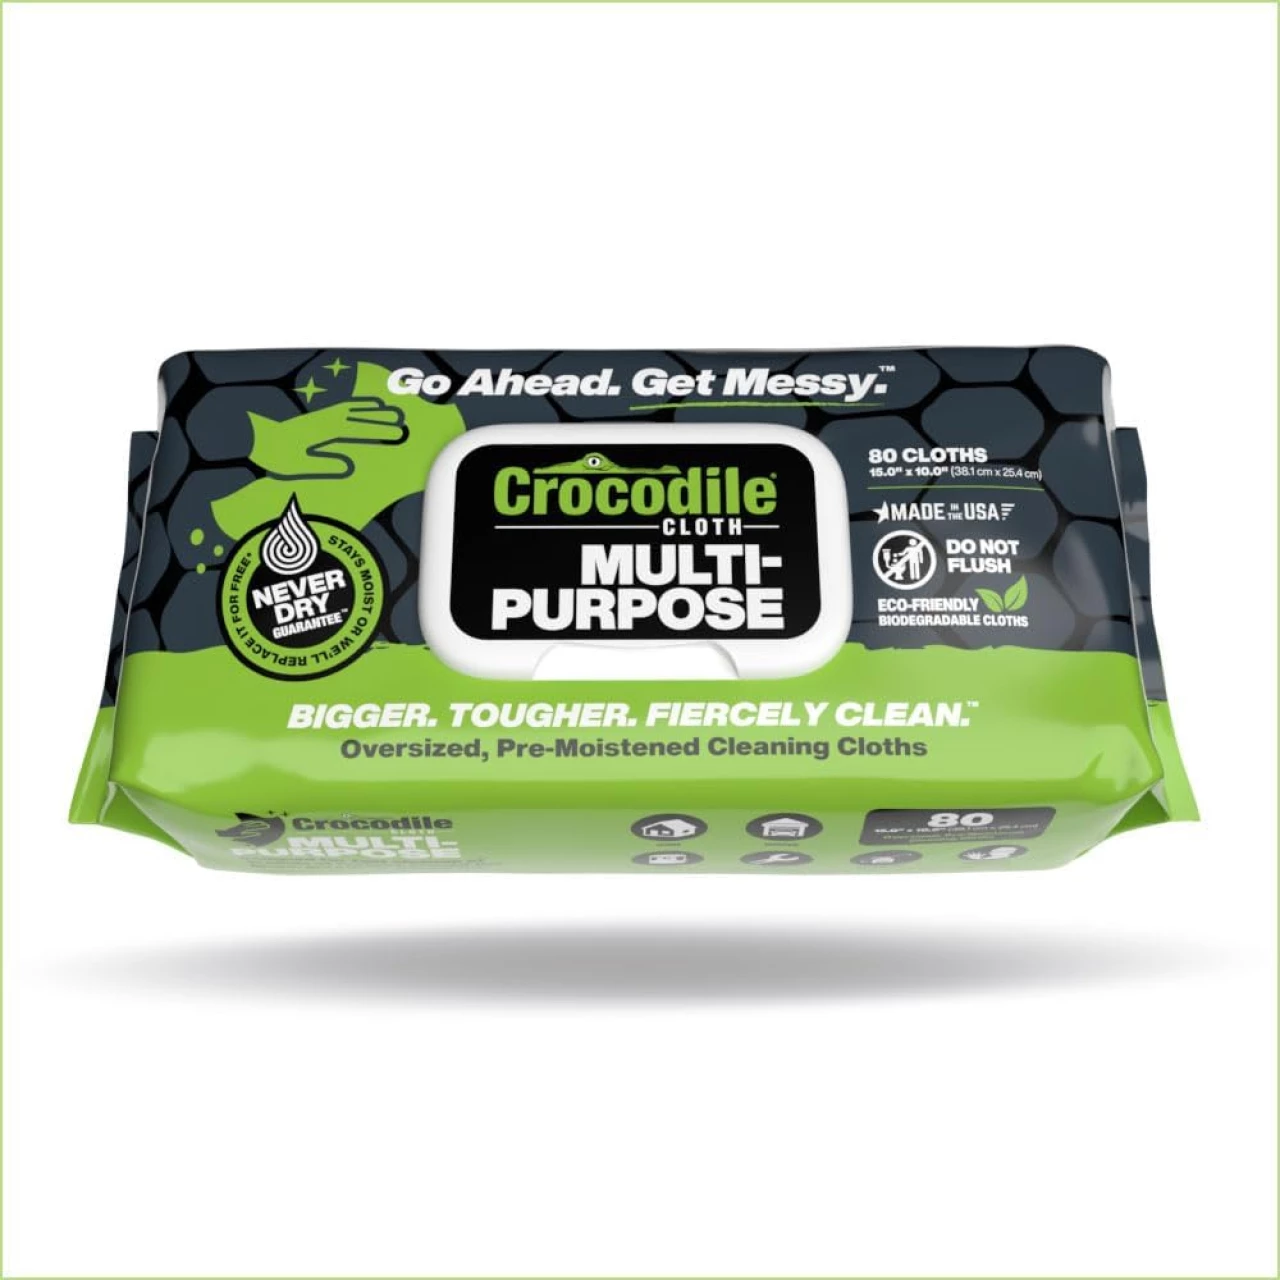 Crocodile Cloth Multi-Purpose Household Cleaning Wipes - The Stronger Easier Way To Clean